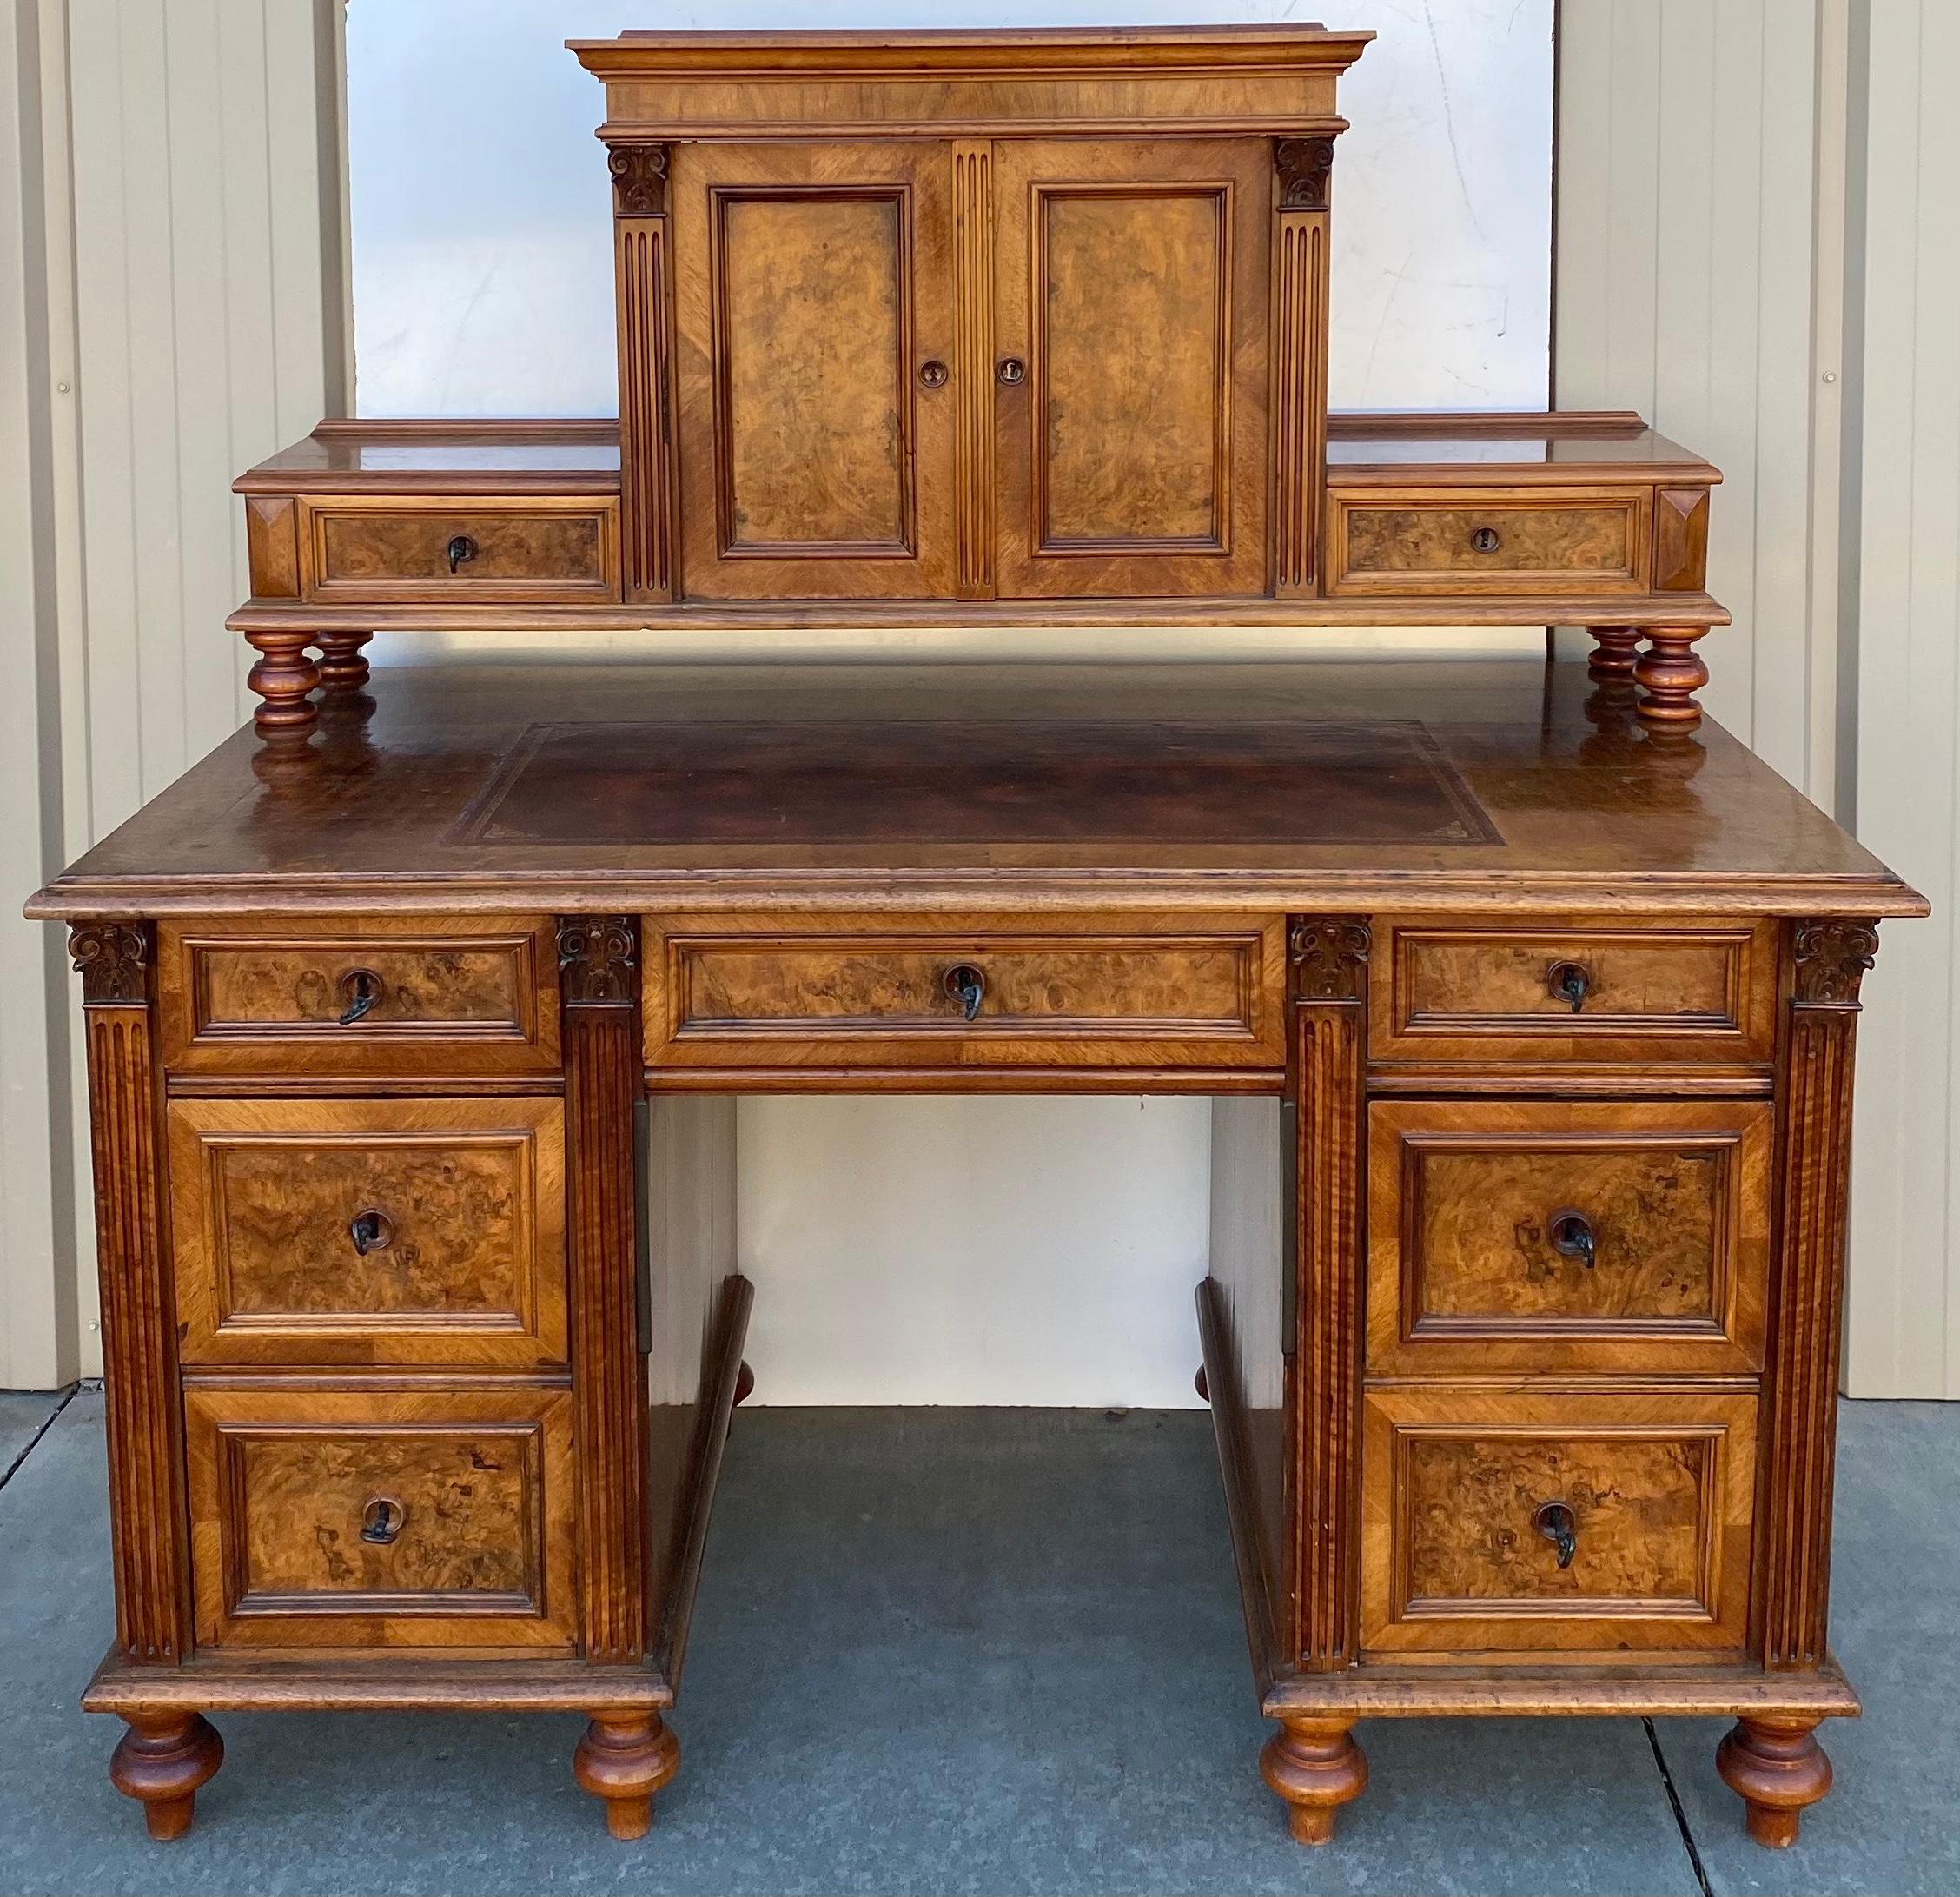 This is a turn-of-the-century Victorian Era burl walnut desk with tooled leather top. The burl is exquisite, and the overall condition is remarkable. The keys are permanently affixed in each drawer to act as pulls. The drawers have dovetail